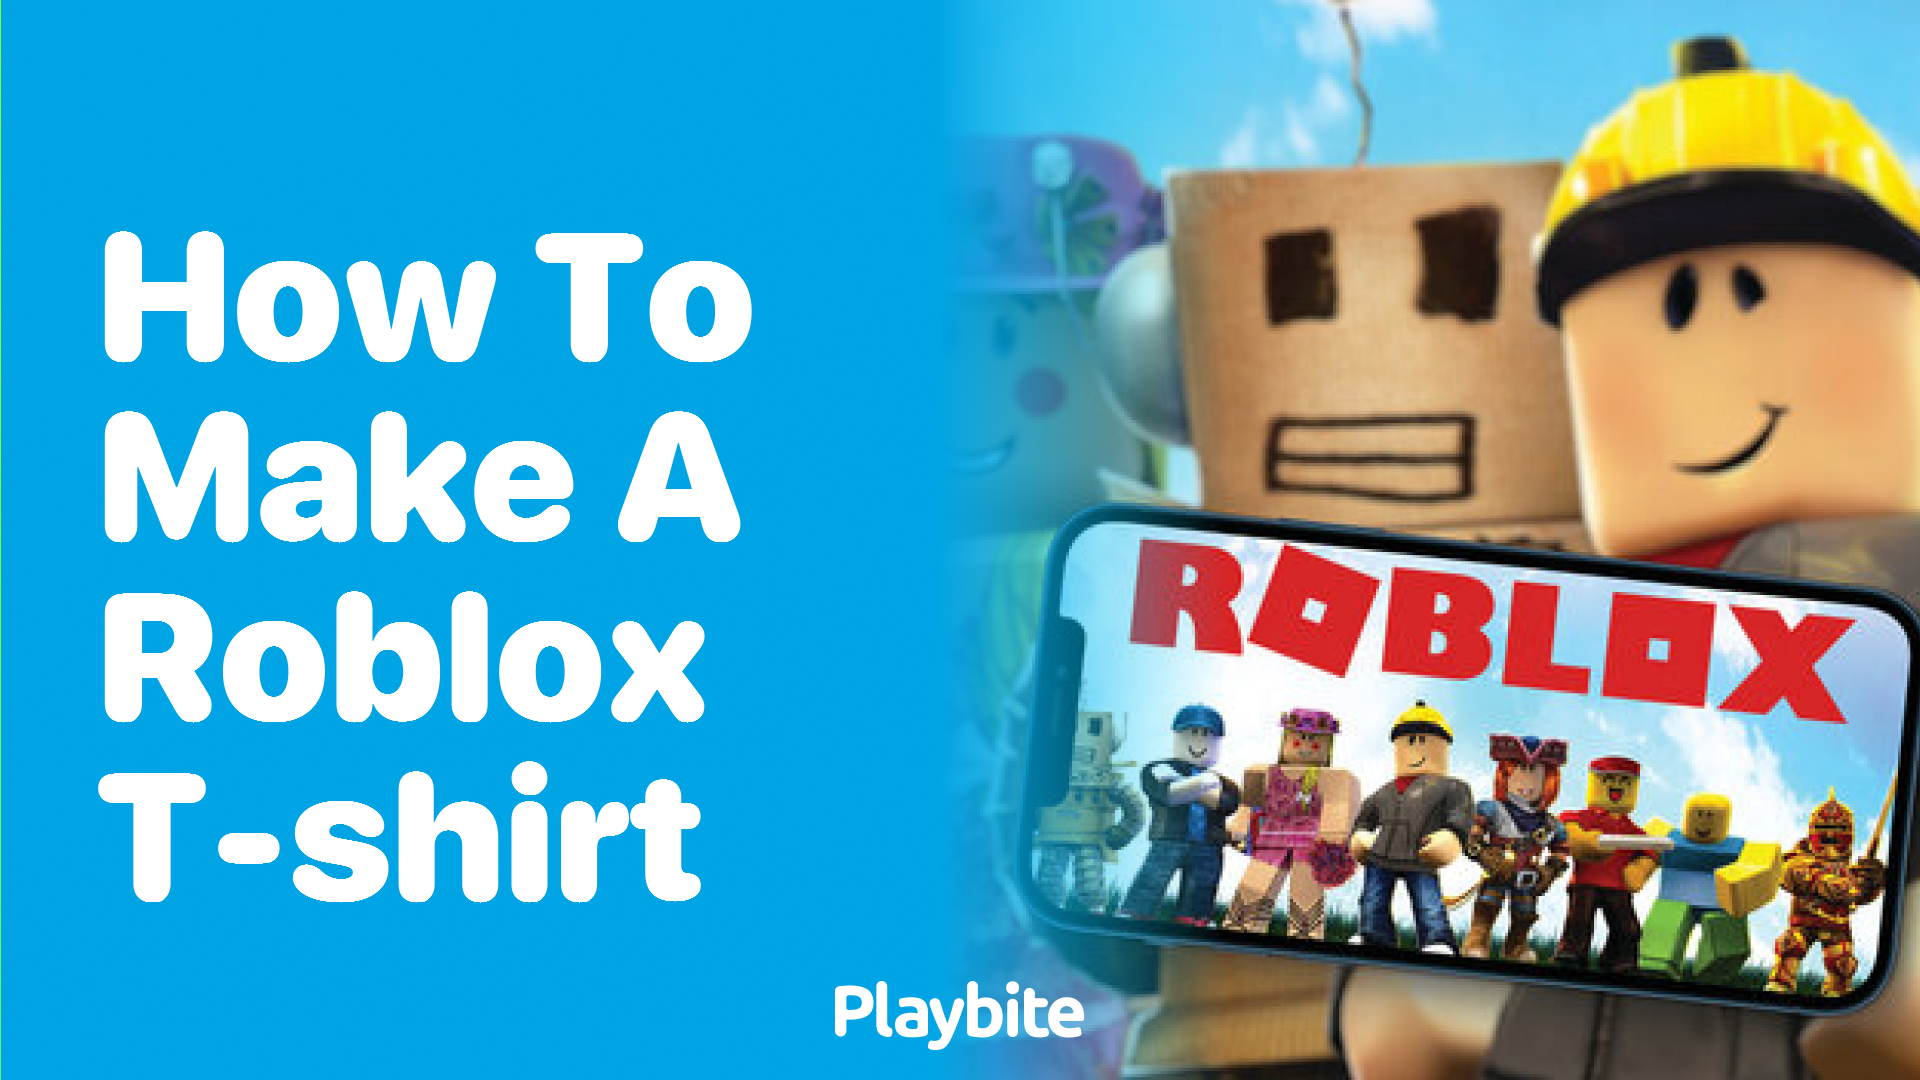 How to Make T-Shirts on Roblox: A Step-by-Step Guide - Playbite